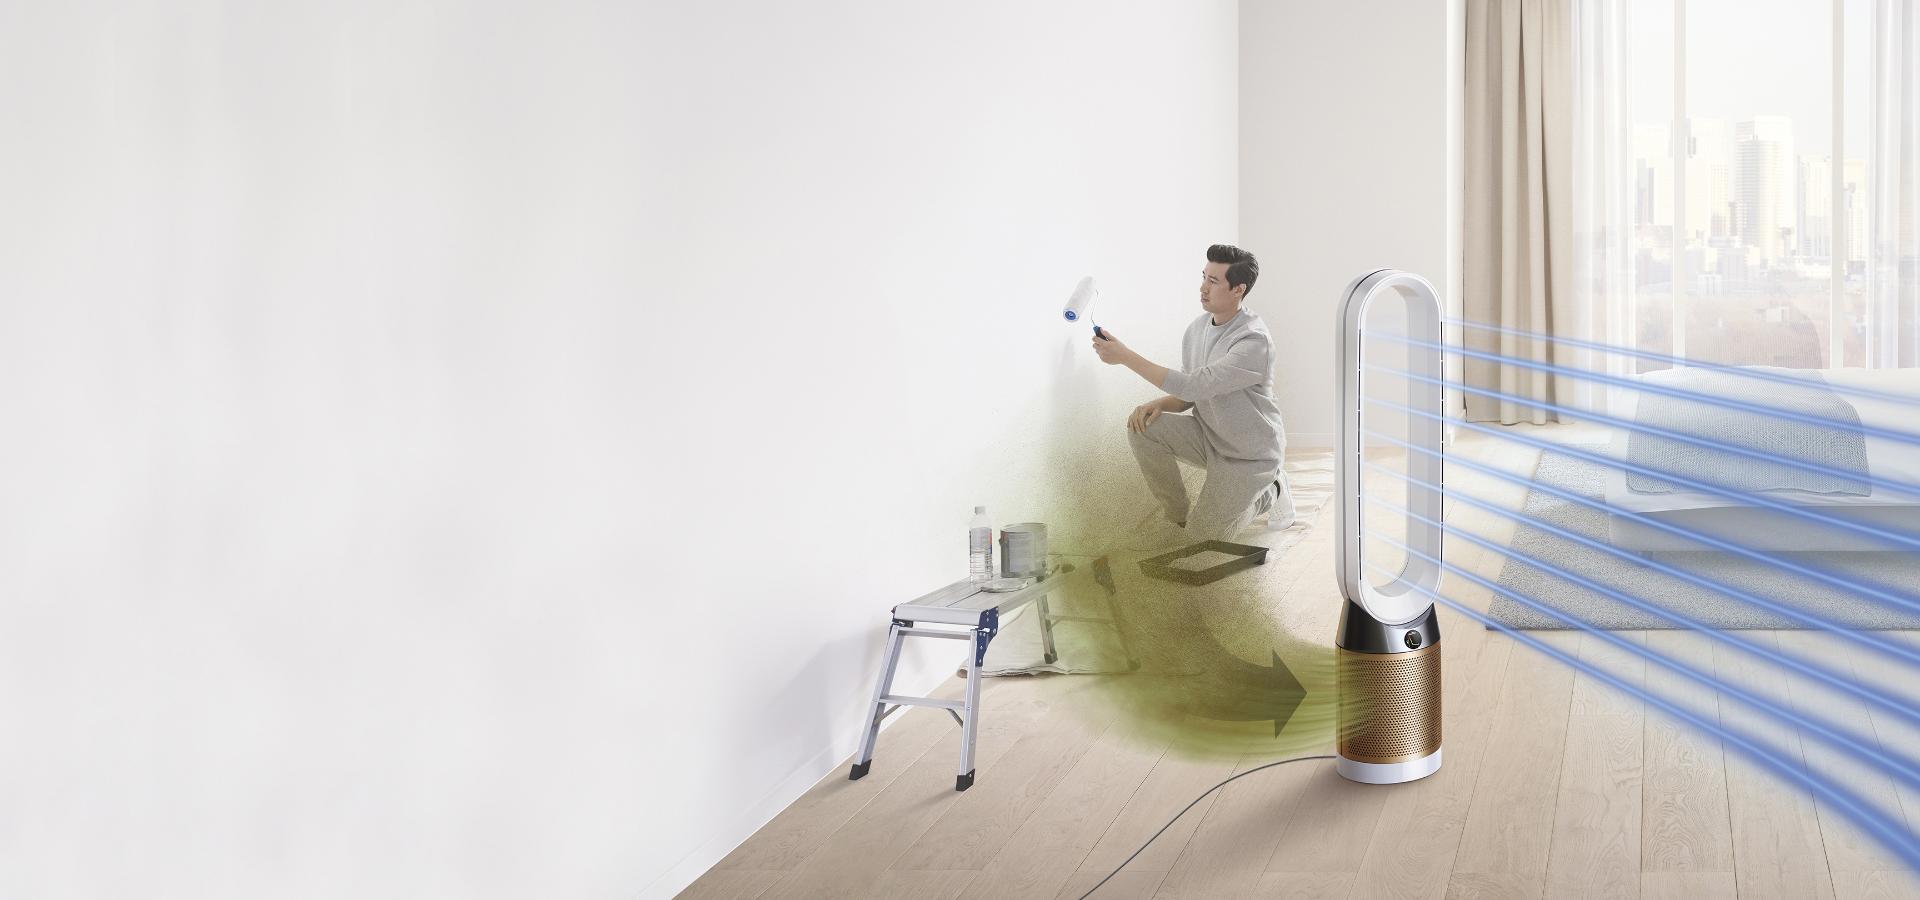 A man paints a room, while formaldehyde gas pollutes the air around him. The Dyson Pure Cryptomic purifier draws in the pollution and projects purified air.